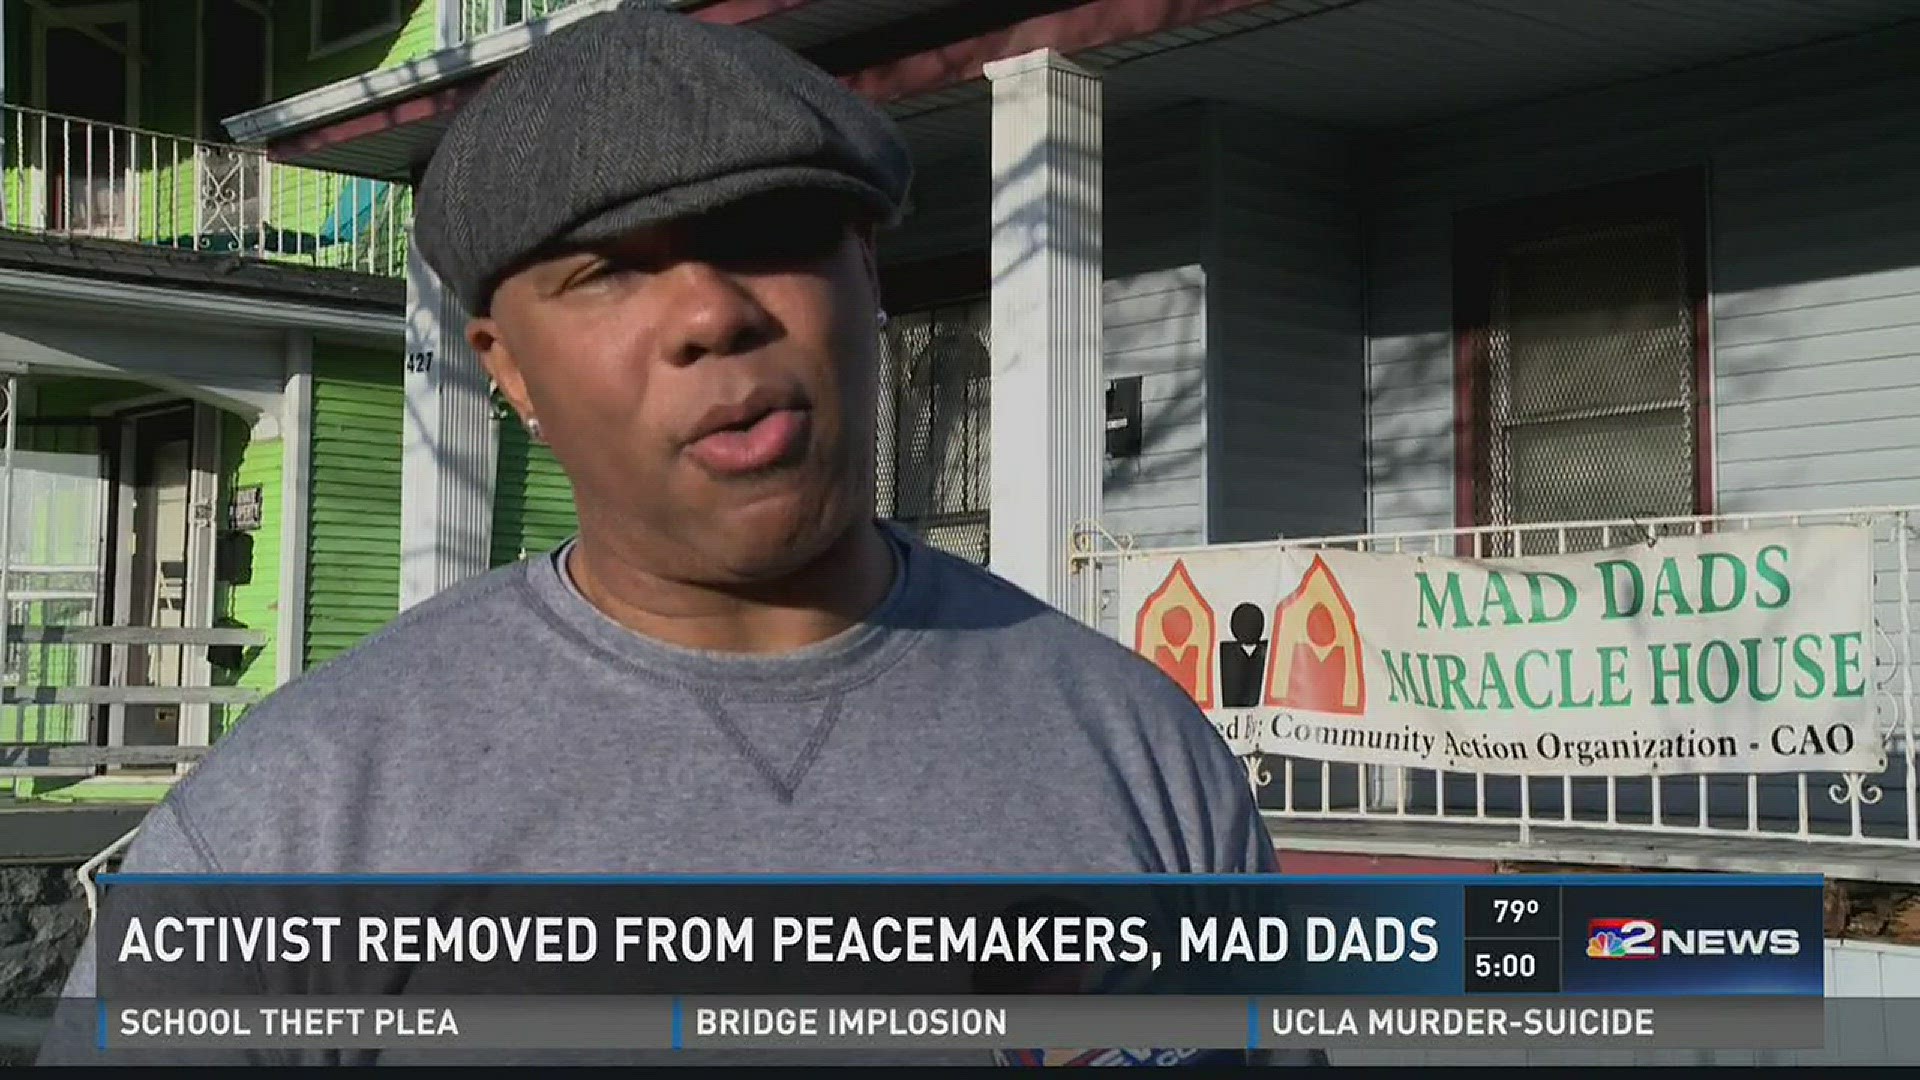 Activist Removed From Peacemakers, Mad Dads